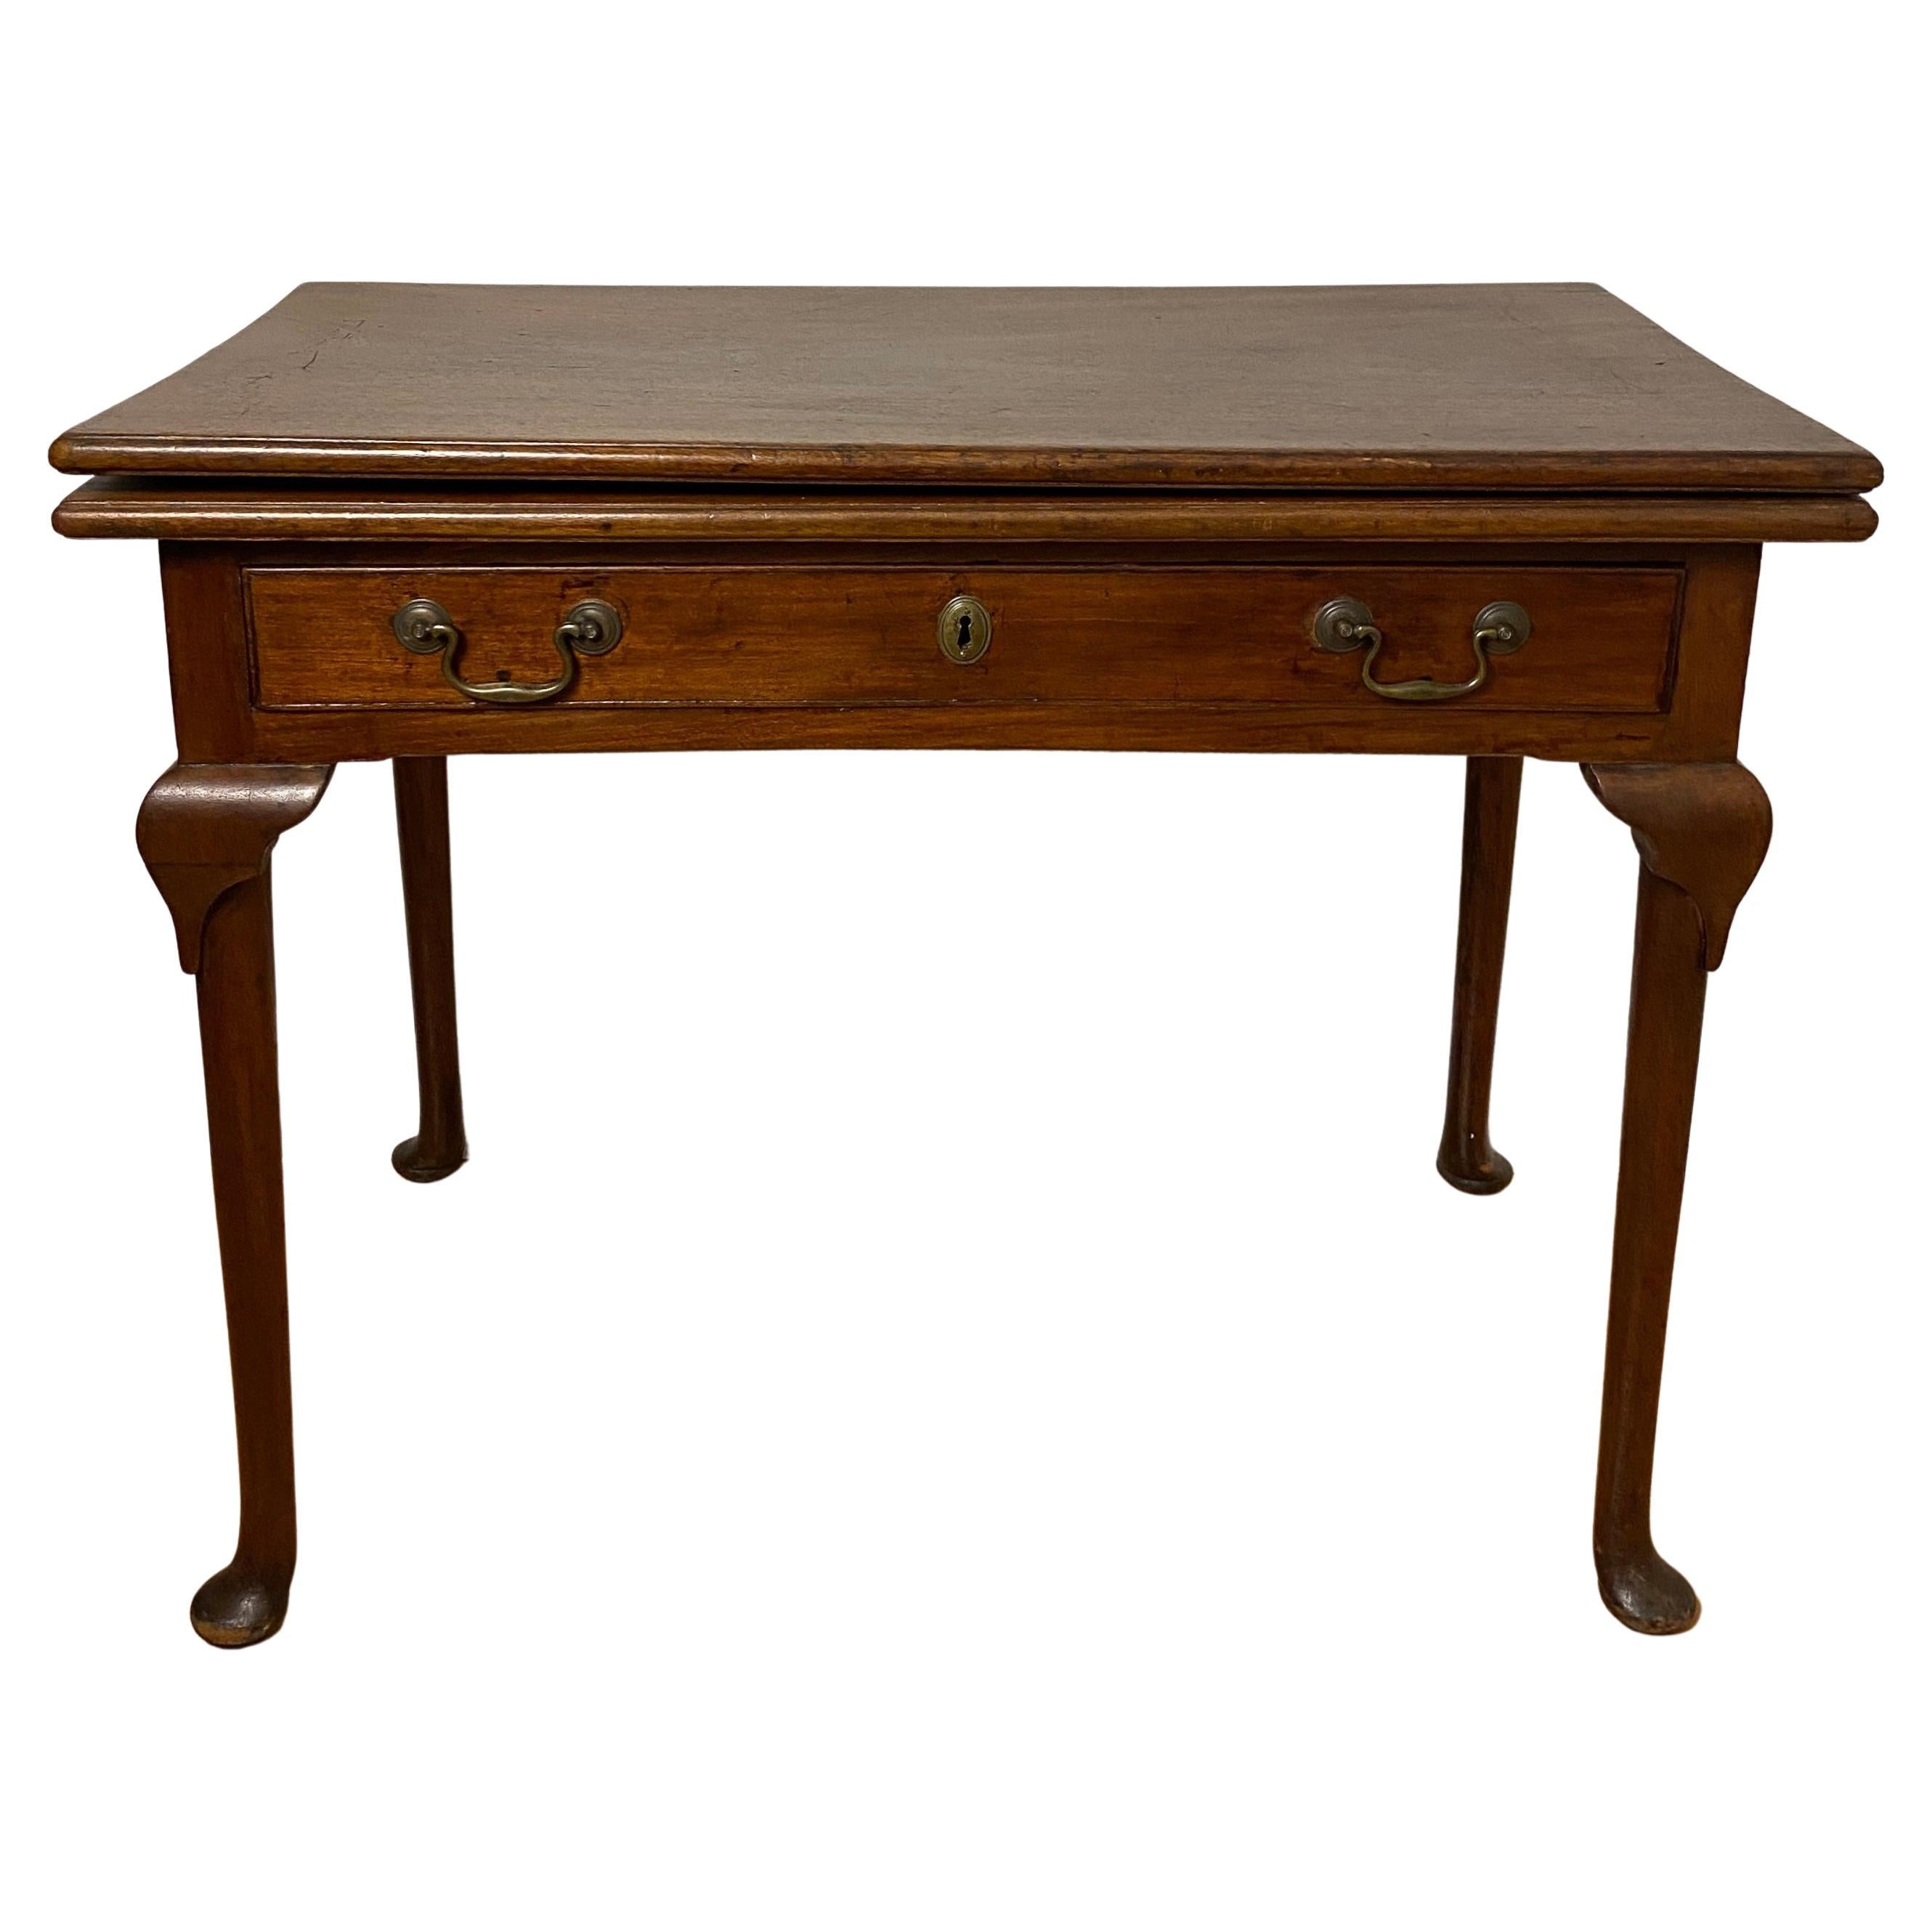 18th Century Early American Federal Period Mahogany Console or Accent Side Table